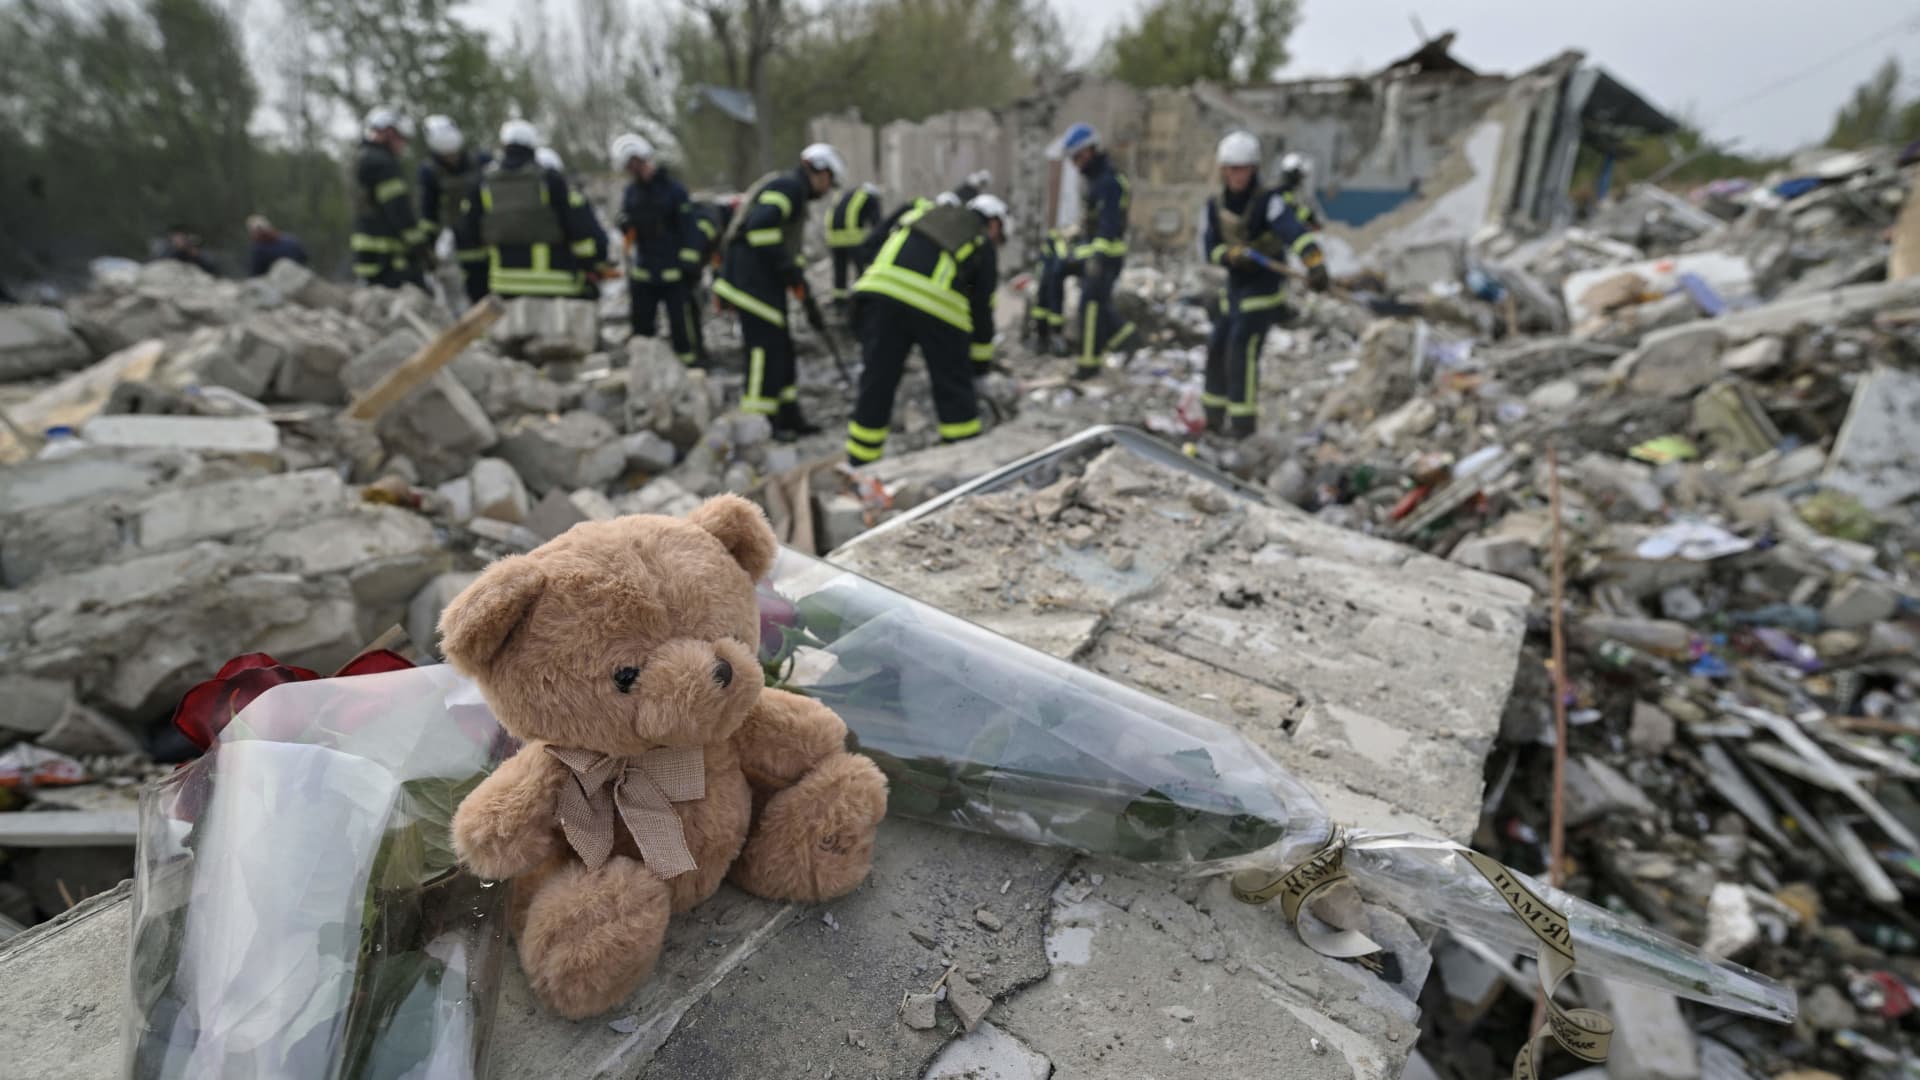 A teddy bear and flowers are displayed on the fragment of a wall as Ukrainian emergency personnel clear debris on the site of a Russian strike which hit a shop and cafe in the village of Groza, some 30 kilometres west of Kupiansk, on October 6, 2023, amid the Russian invasion of Ukraine.